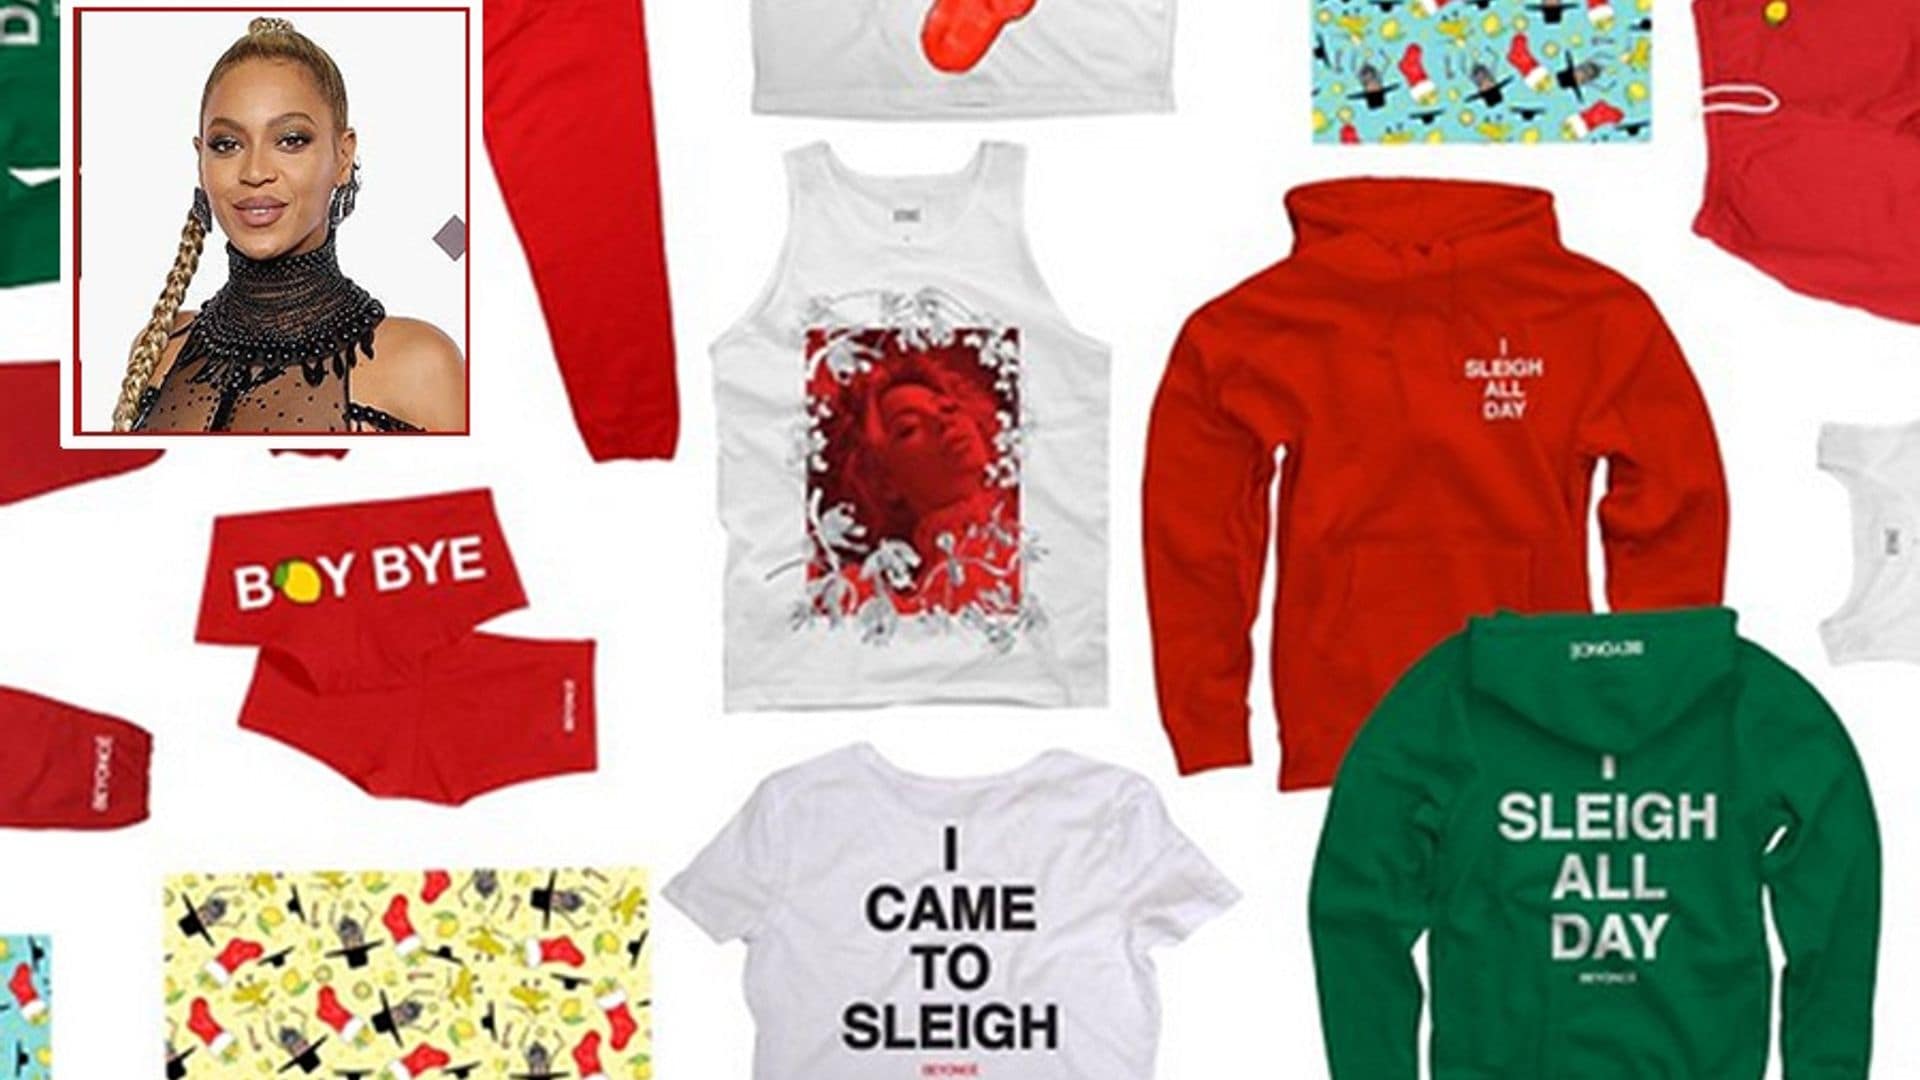 Beyoncé releases a new holiday line so you can 'sleigh all day'